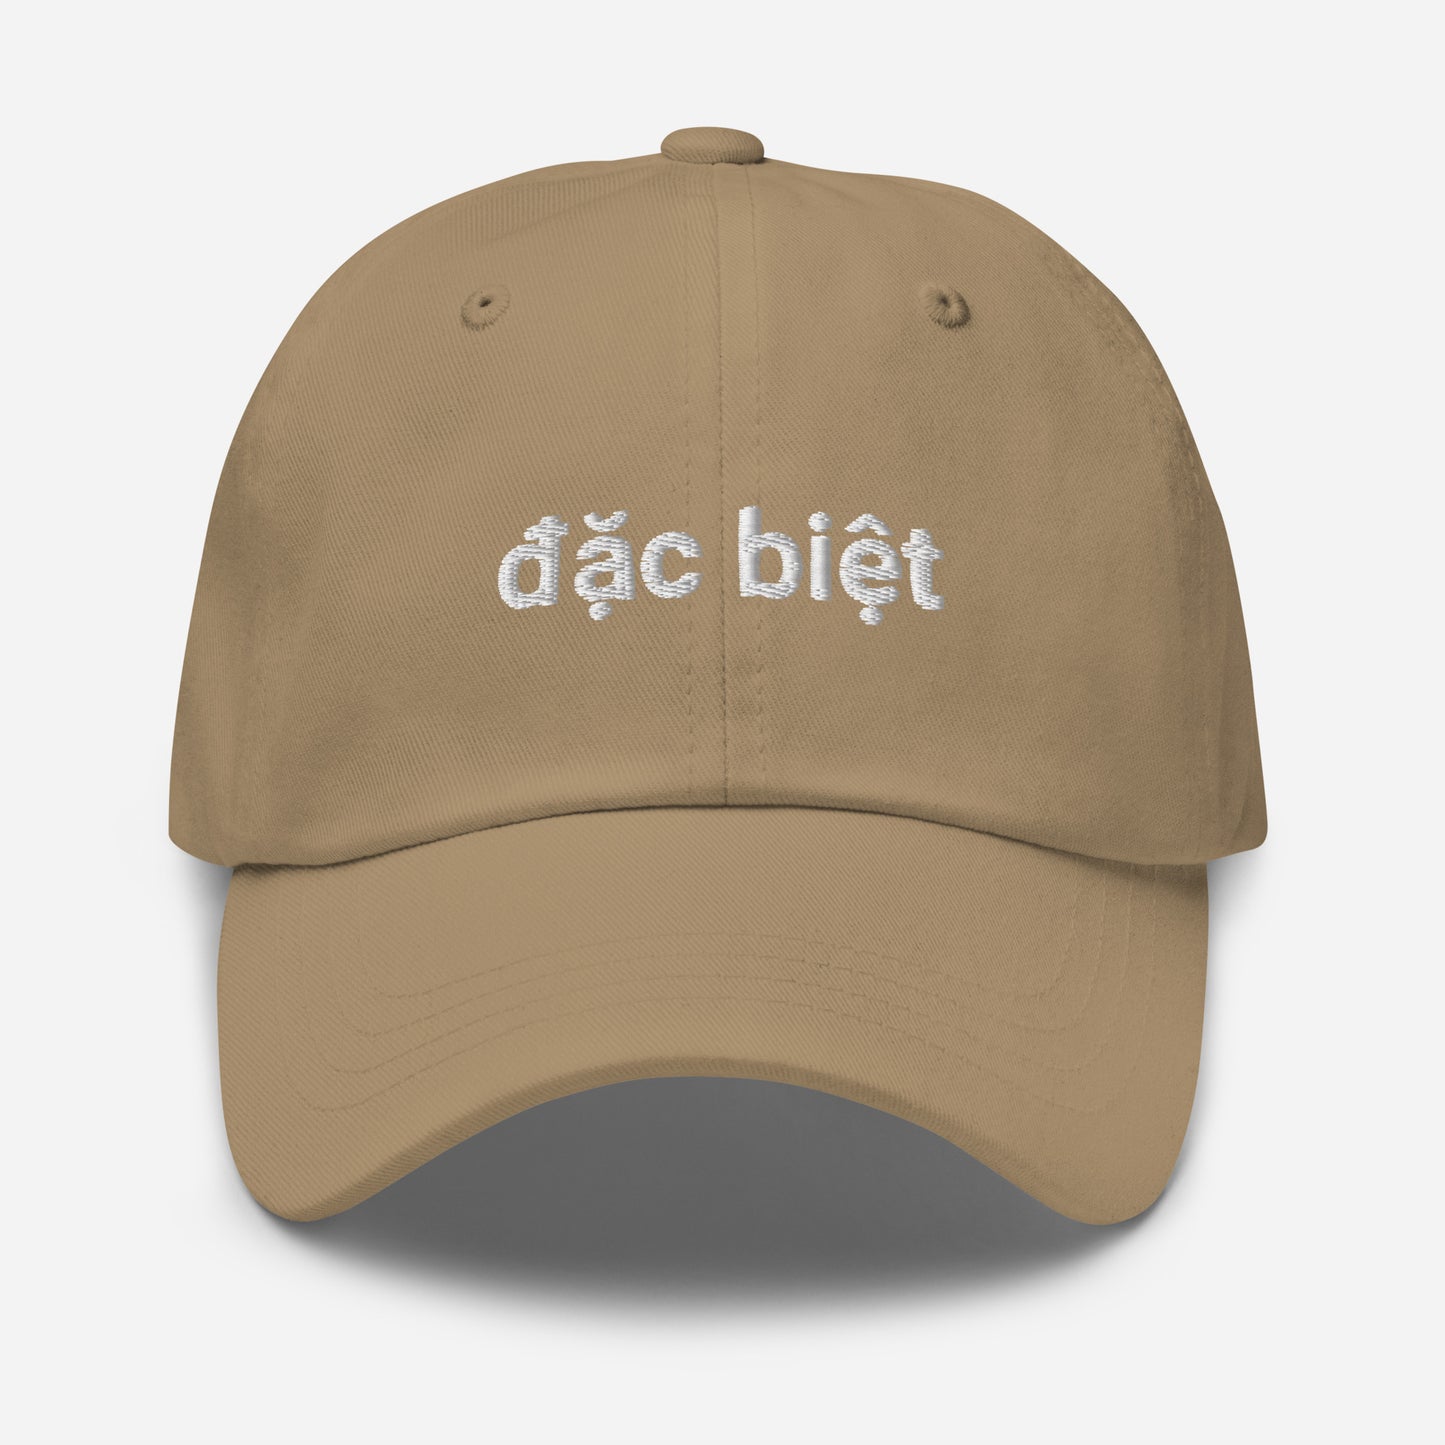 Embroidered đặc biệt Dad Hat | Multiple Colors Available!